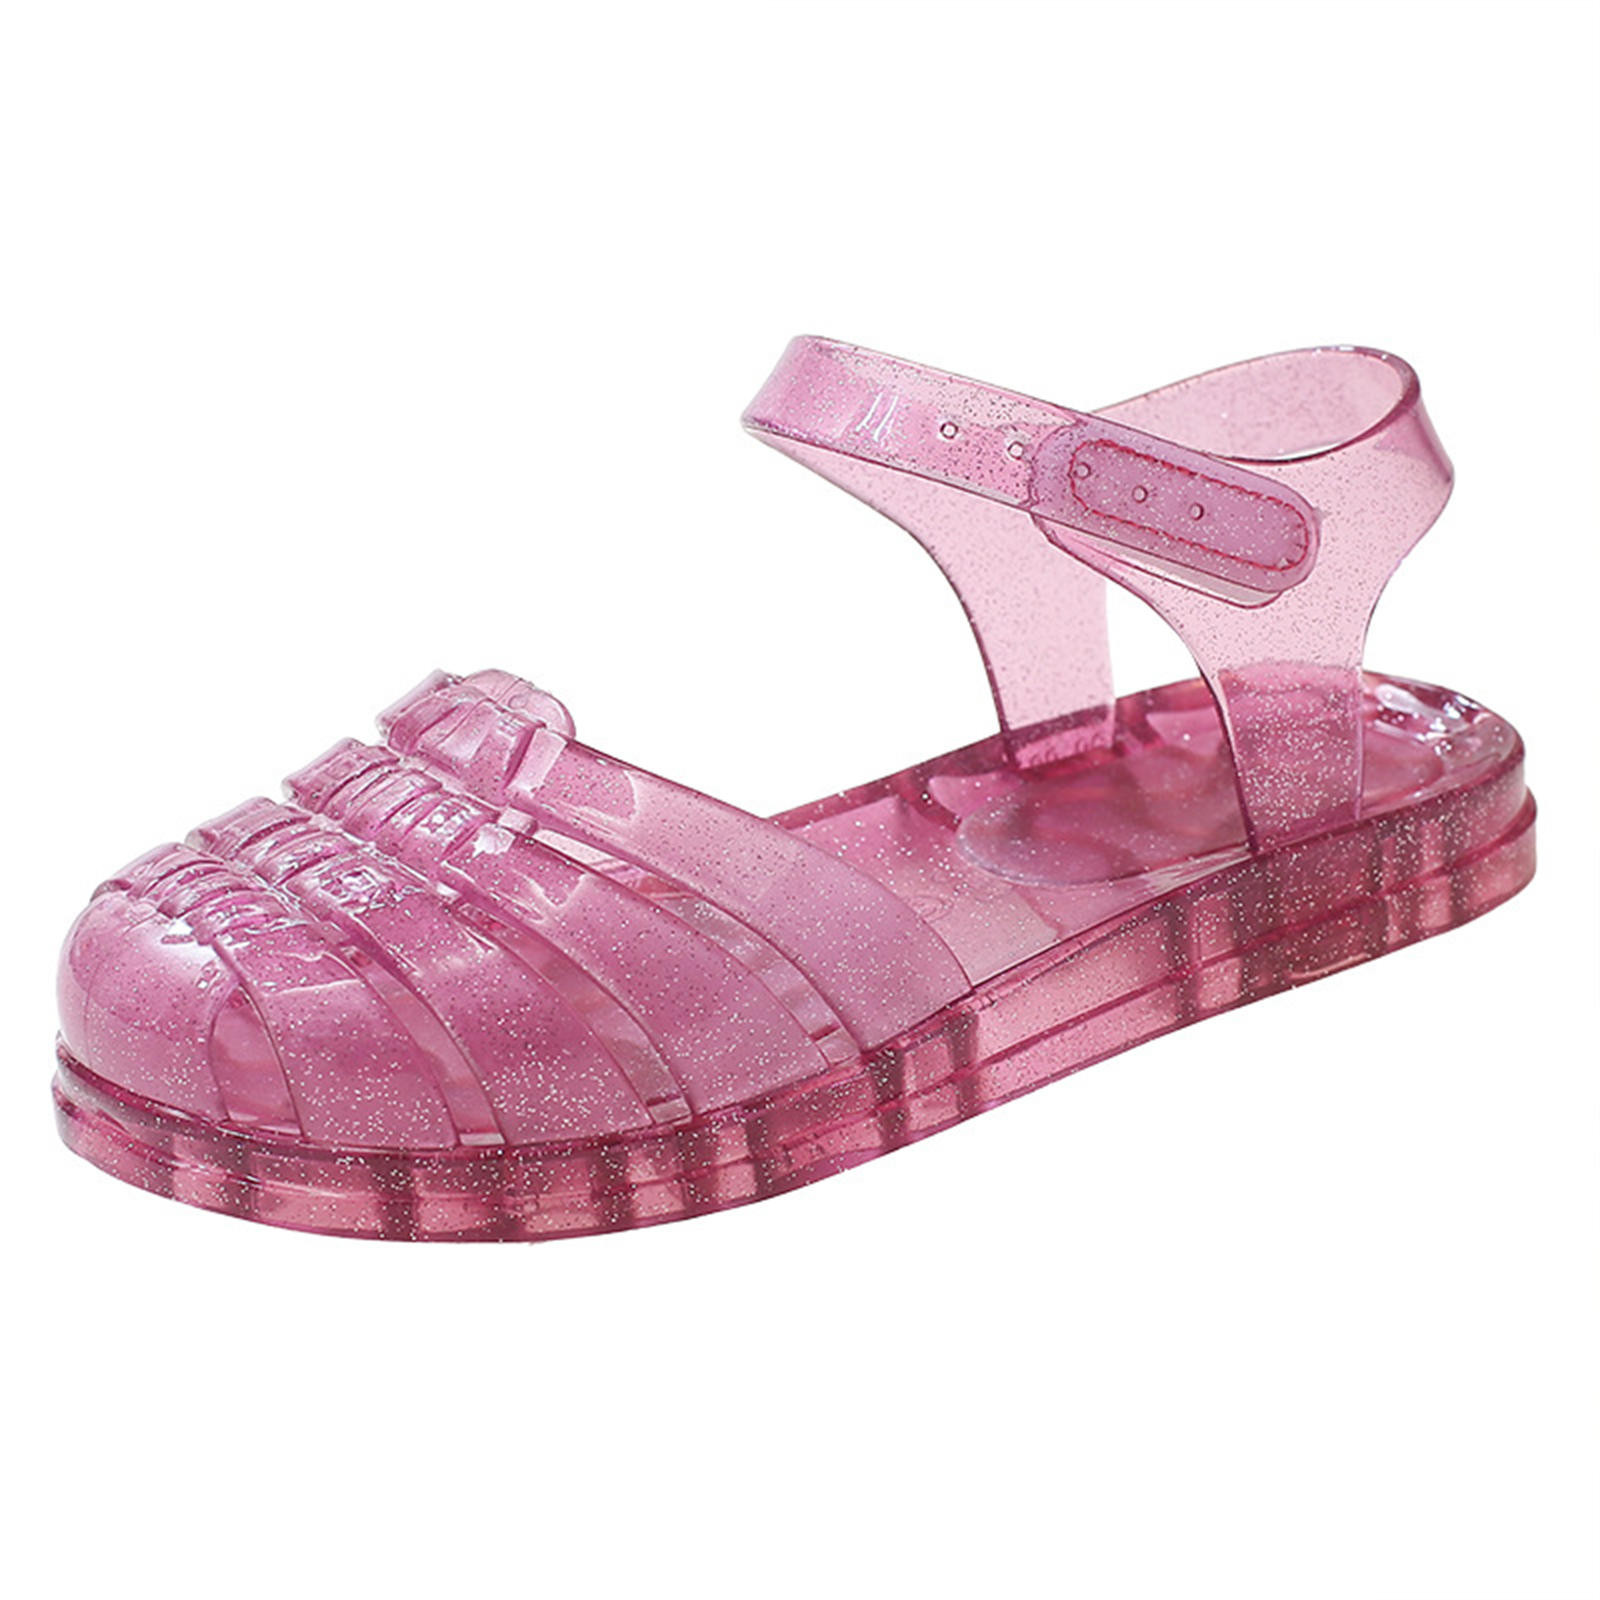 Clearance! SDJMa Jelly Shoes for Toddler Girls Summer Beach Retro Sandals T-Strap Slingback Little Kids Glitter Soft Closed Toe Princess Dress Flat - image 2 of 9